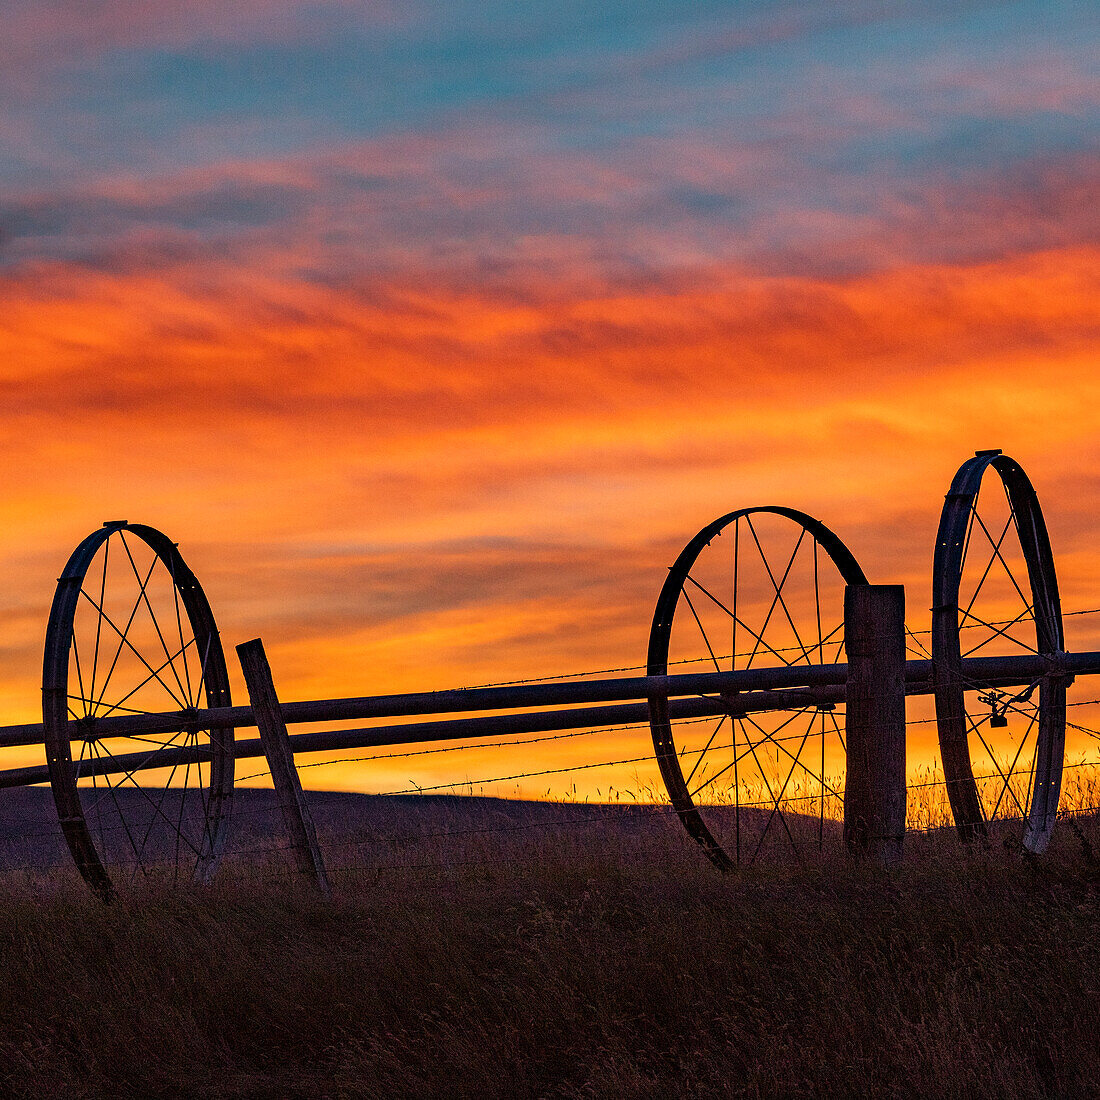 USA, Idaho, Bellevue, Silhouette of irrigation wheels in field at sunset